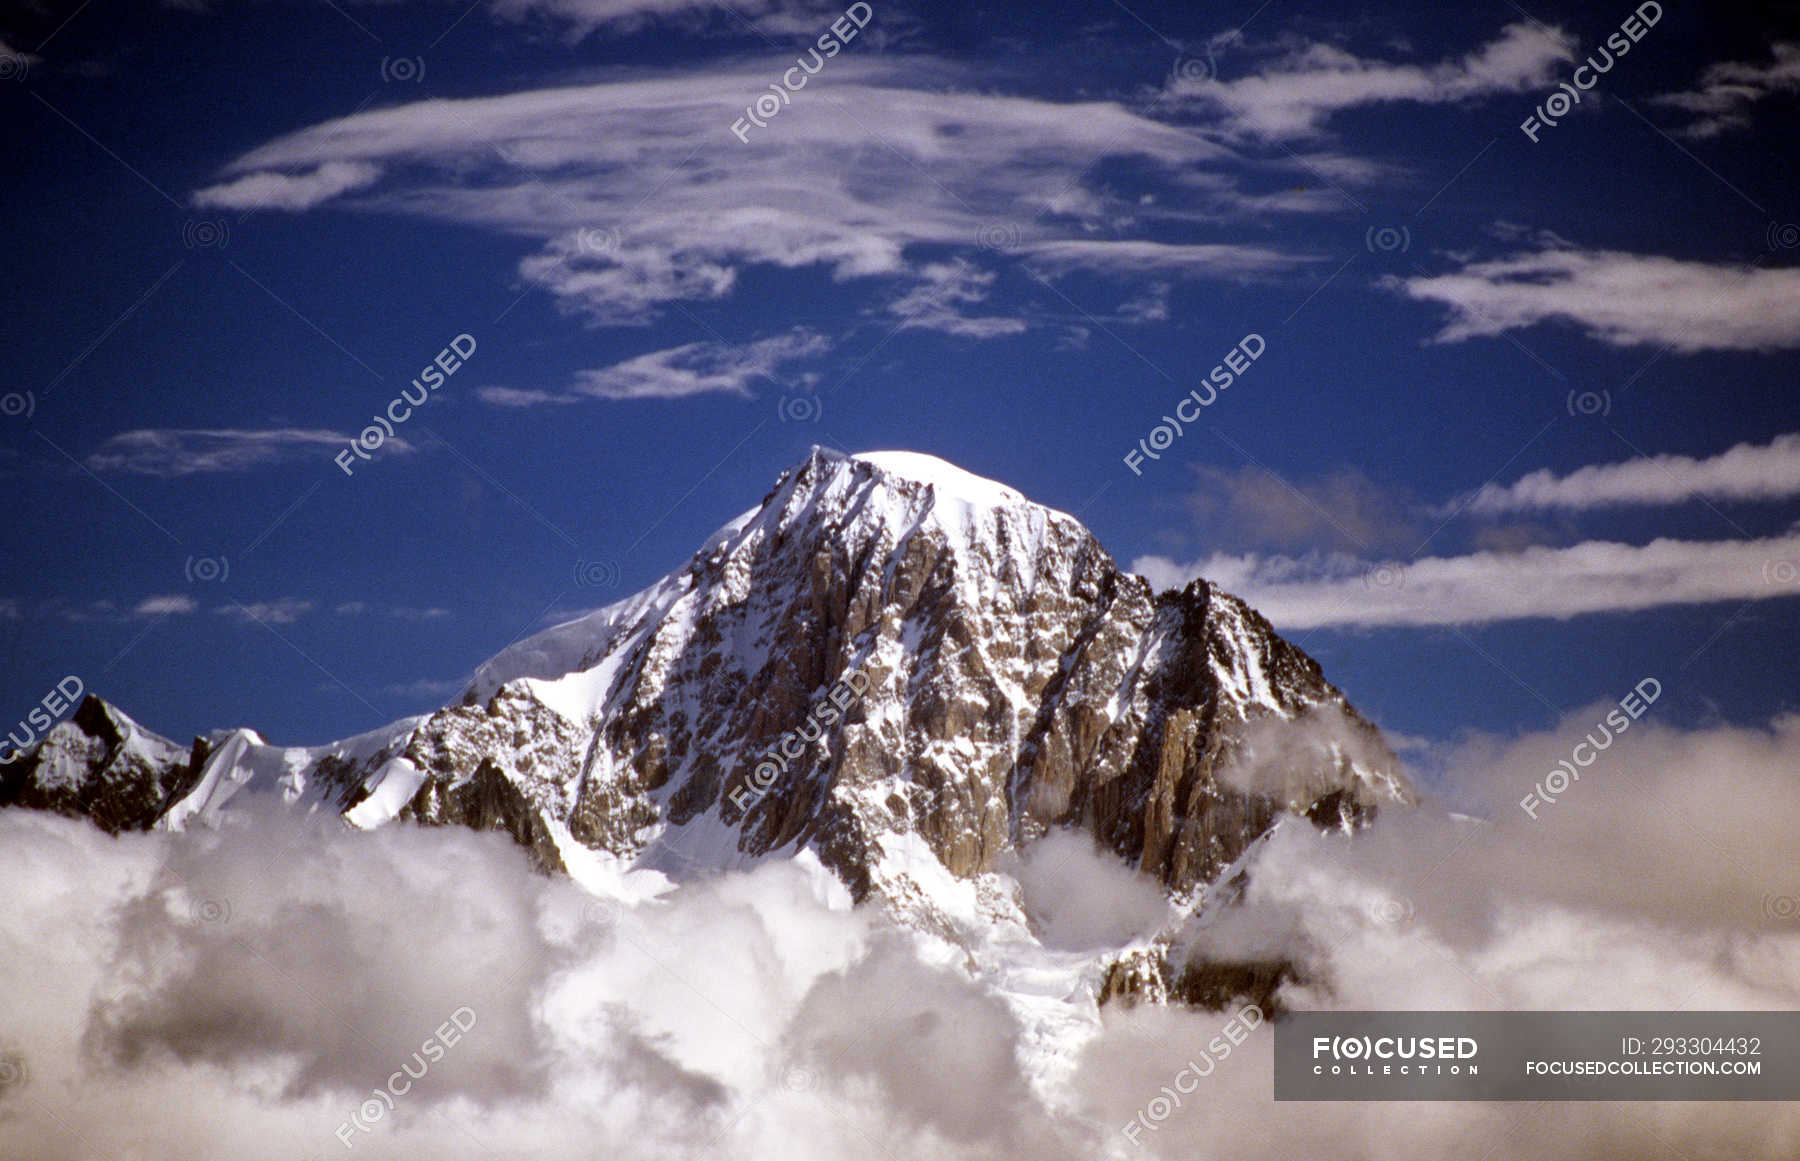 korn Northern jord Monte Bianco, view from La Thuile Valley, Aosta Valley, Italy — landscape,  hiking - Stock Photo | #293304432